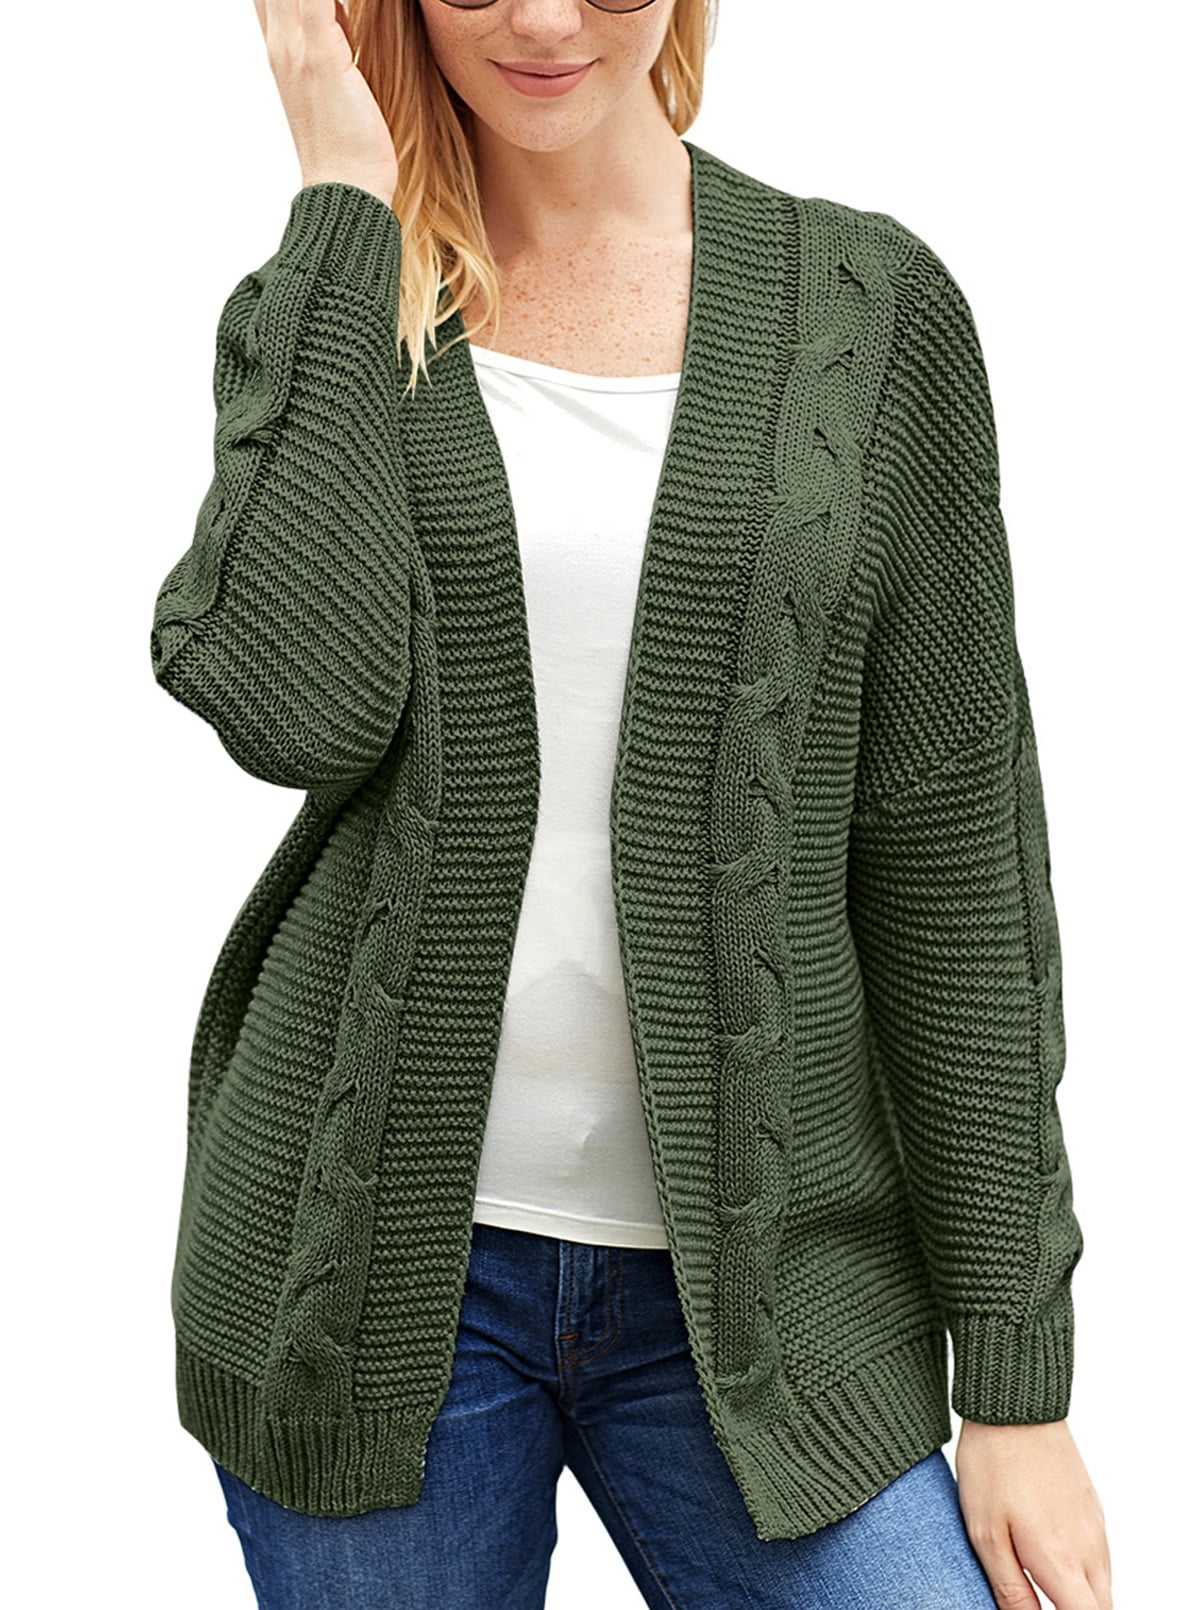 Aleumdr Womens Open Front Cardigan Green Sweater Long Sleeve Cable Knit ...